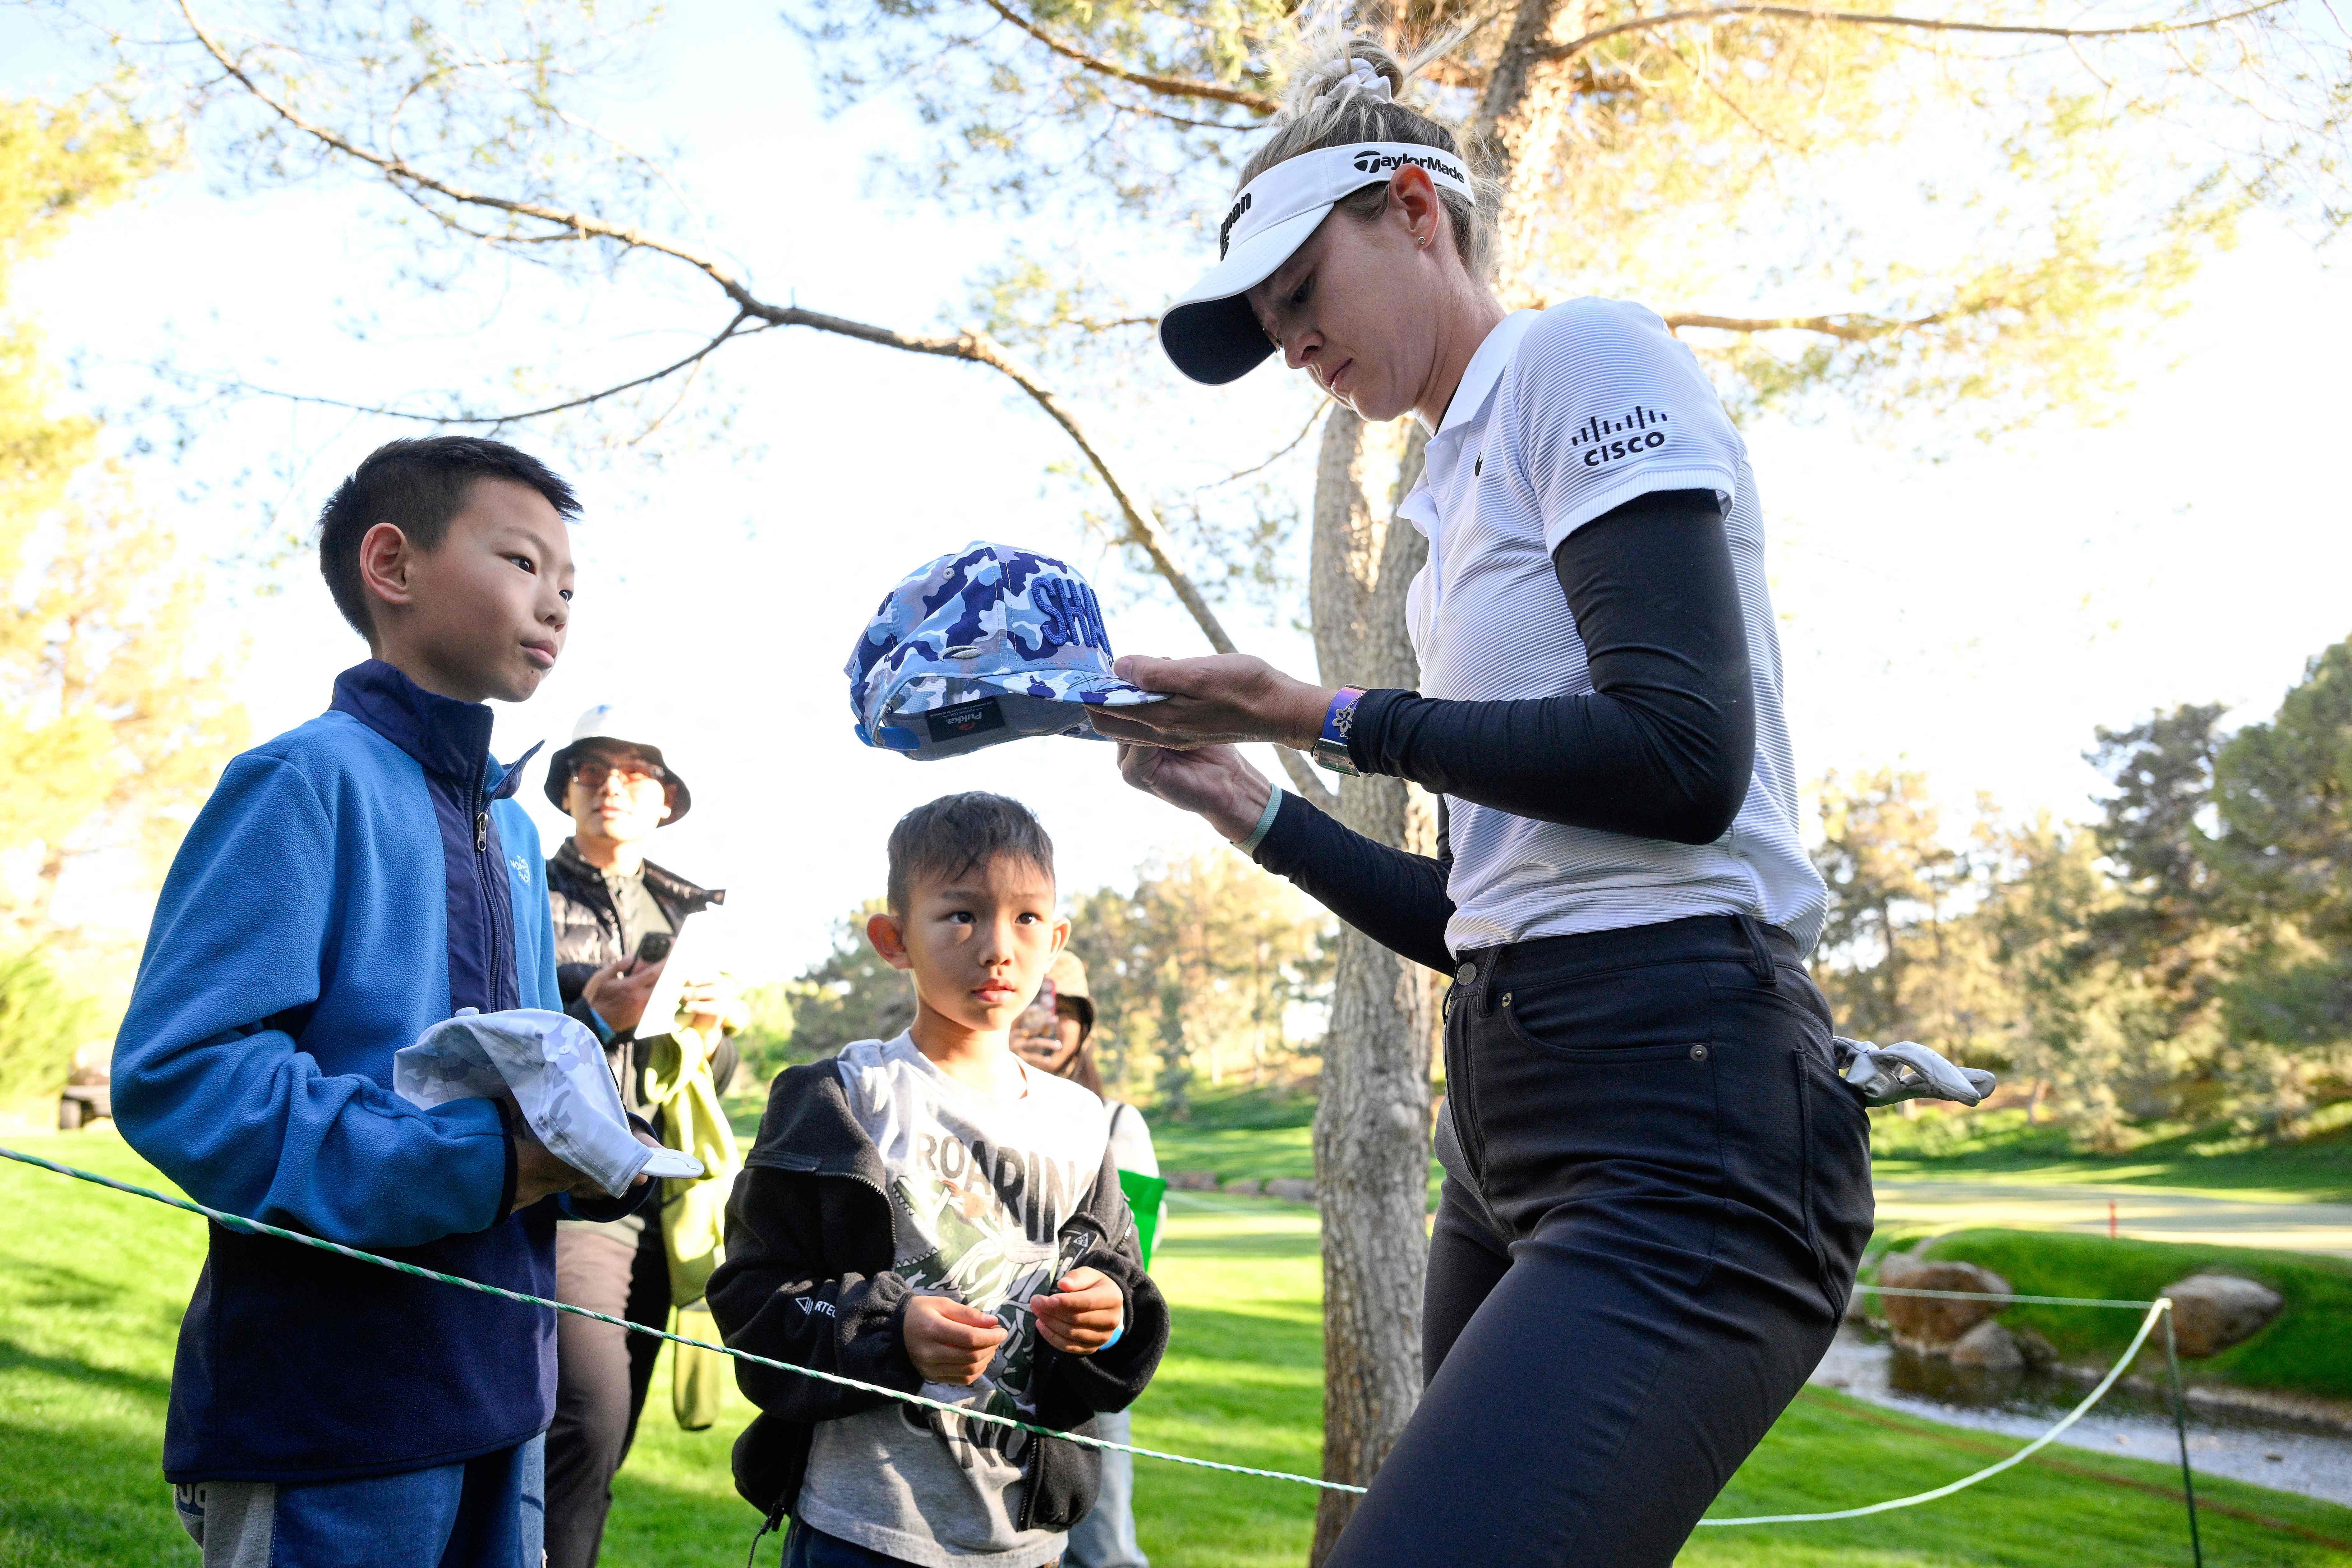 Nelly Korda, Leona Maguire in championship round at LPGA Match Play